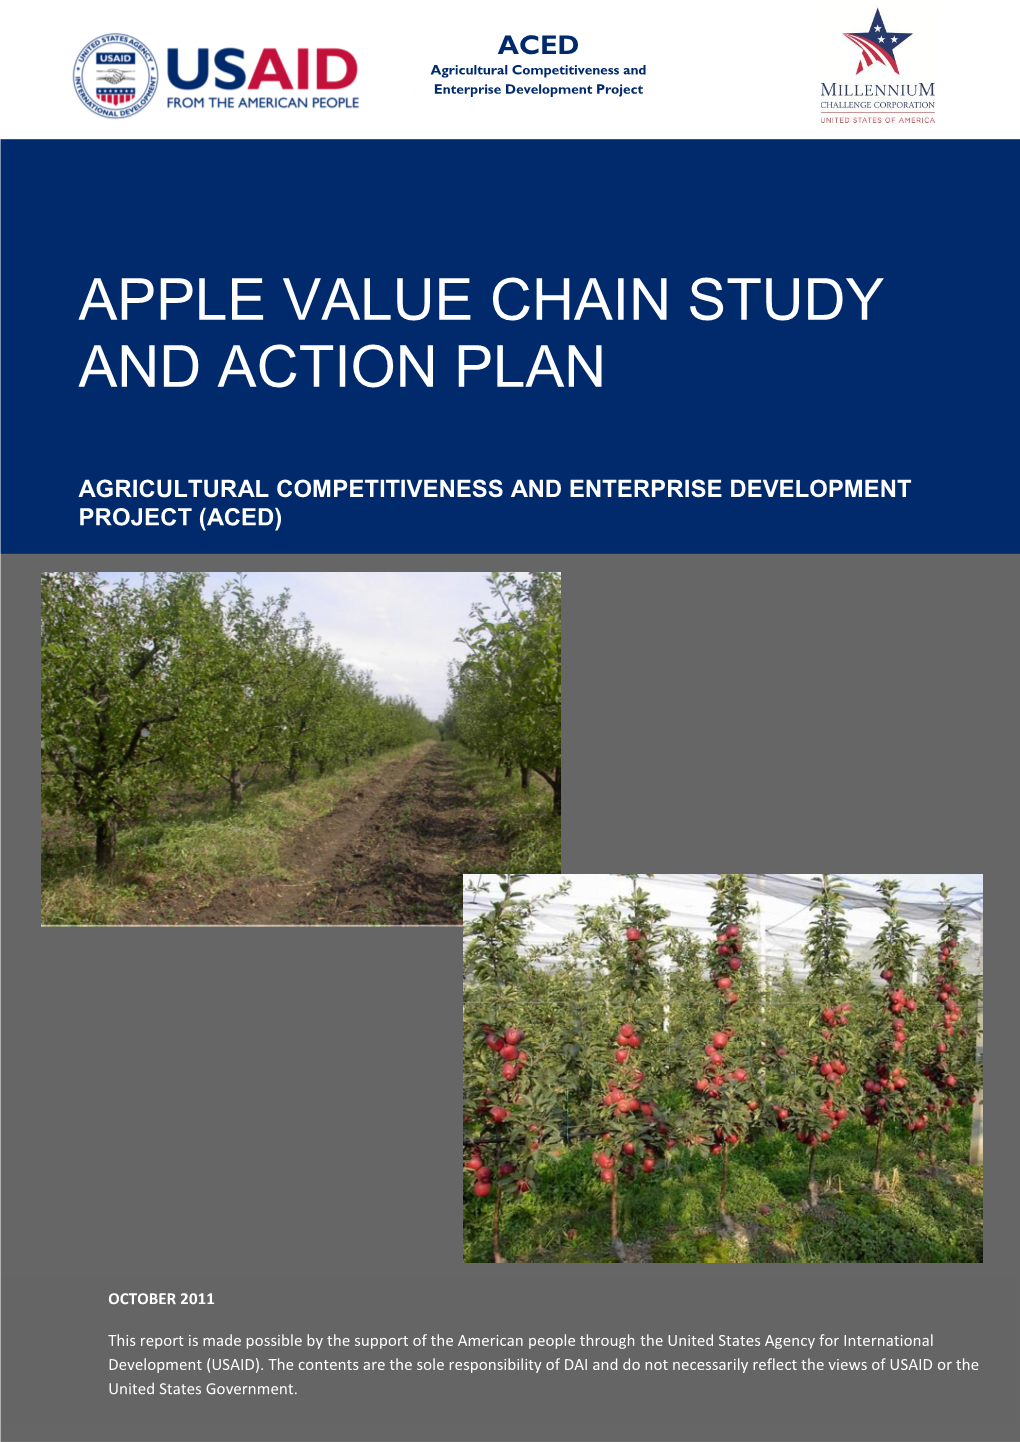 Apple Value Chain Study and Action Plan